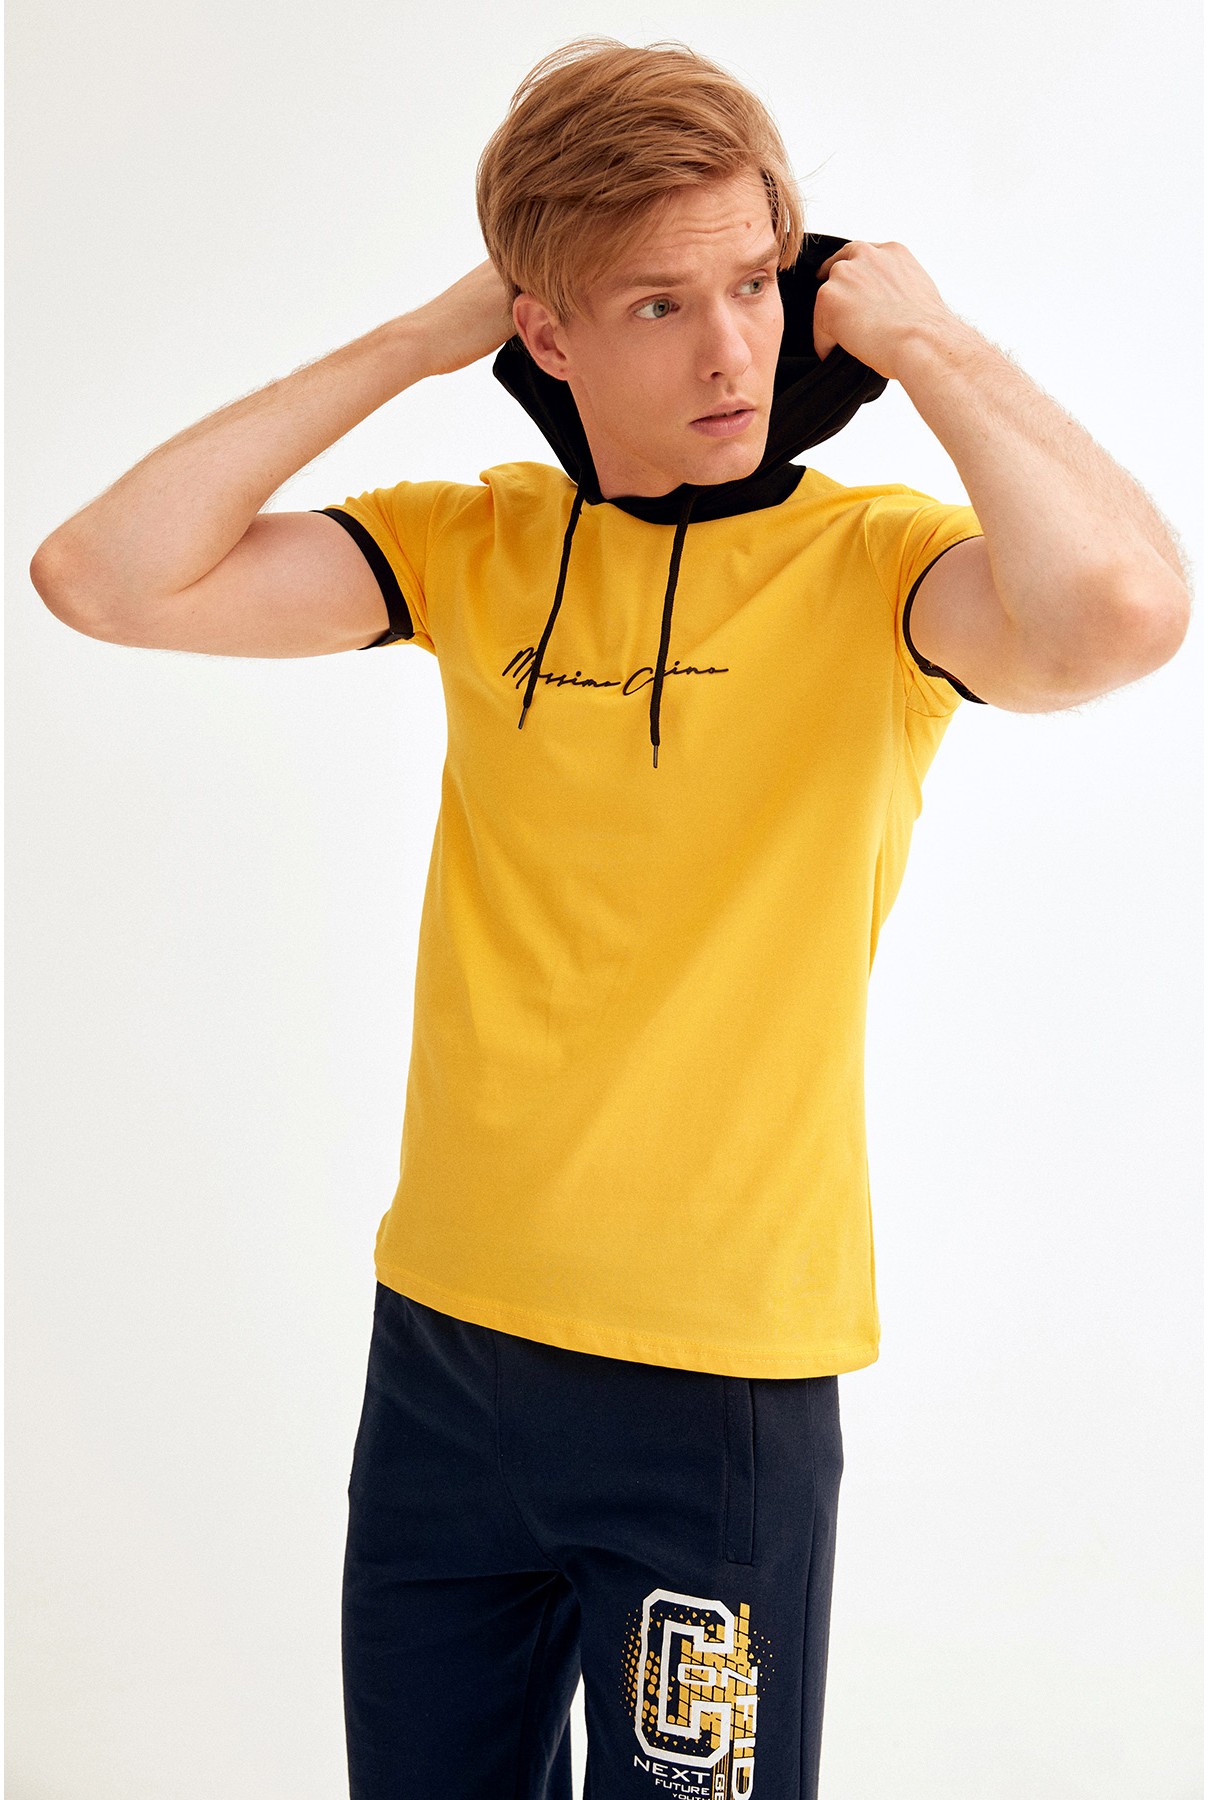 T-shirt yellow color